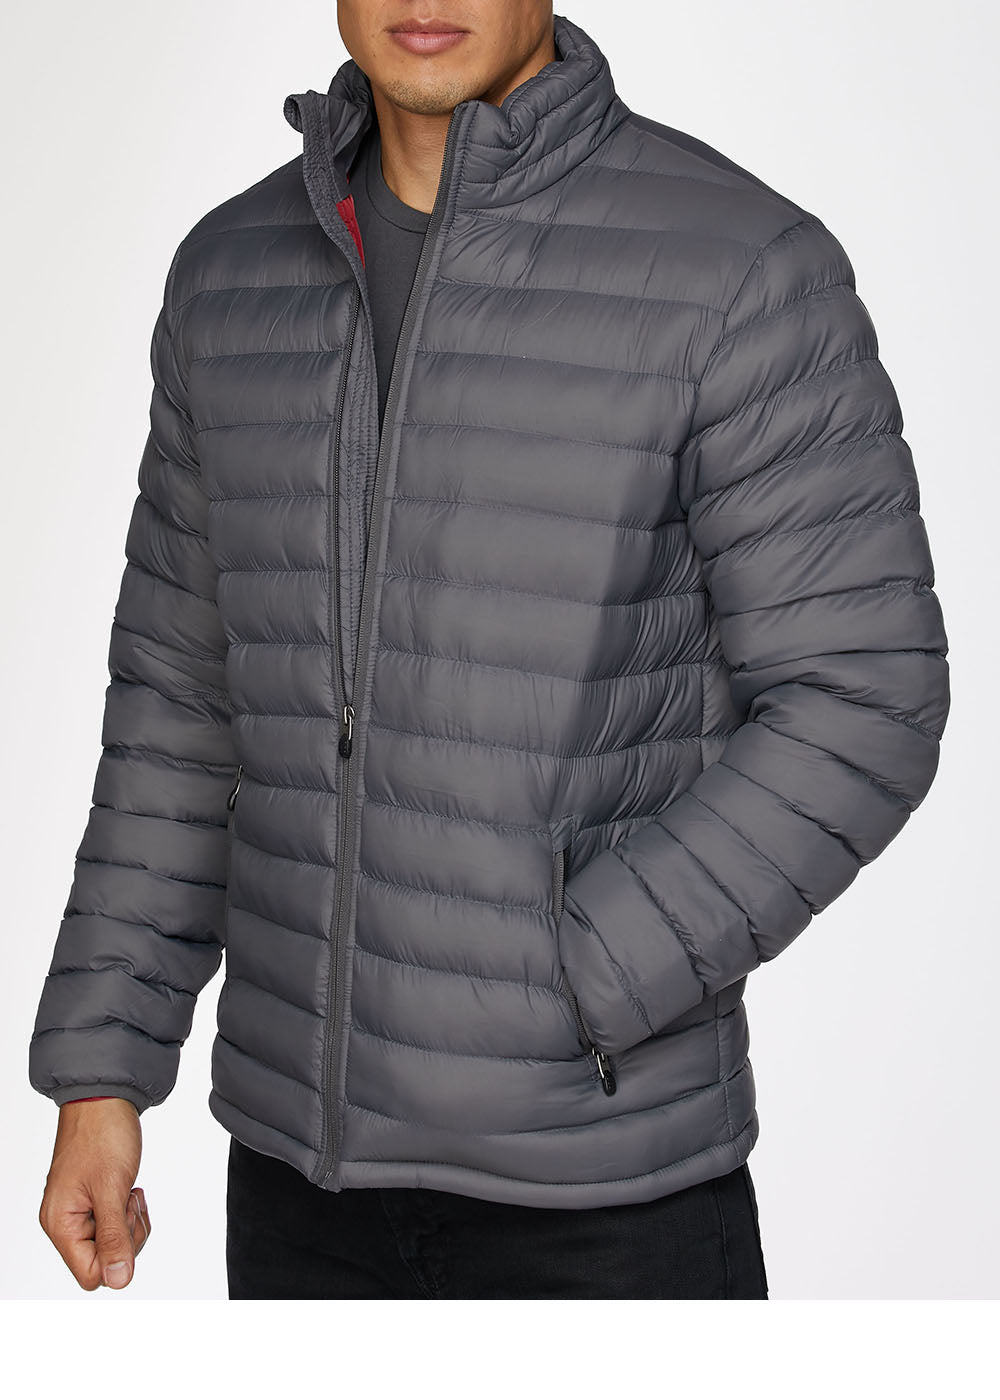 Men's Nylon Quilted Puffer Jacket -NJ640-Charcoal